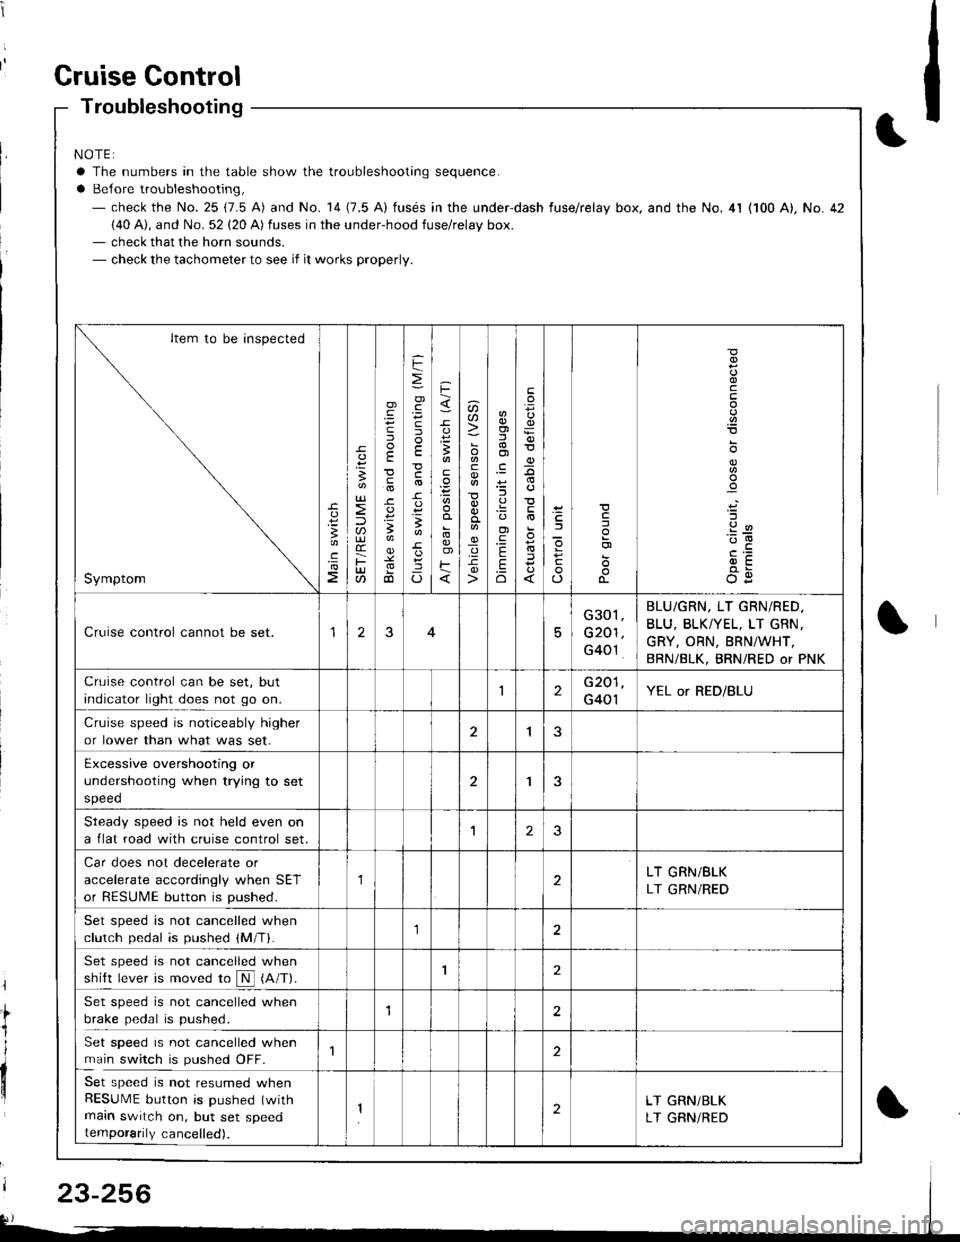 HONDA INTEGRA 1998 4.G Workshop Manual t
t;
il
I
dil
Gruise Gontrol
Troubleshooting
NOTE:
a The numbers in the table show the troubleshooting sequence.
a Belore troubleshooting,- check the No. 25 (7.5 A) and No. 14 (7.5 A) fusds in the un